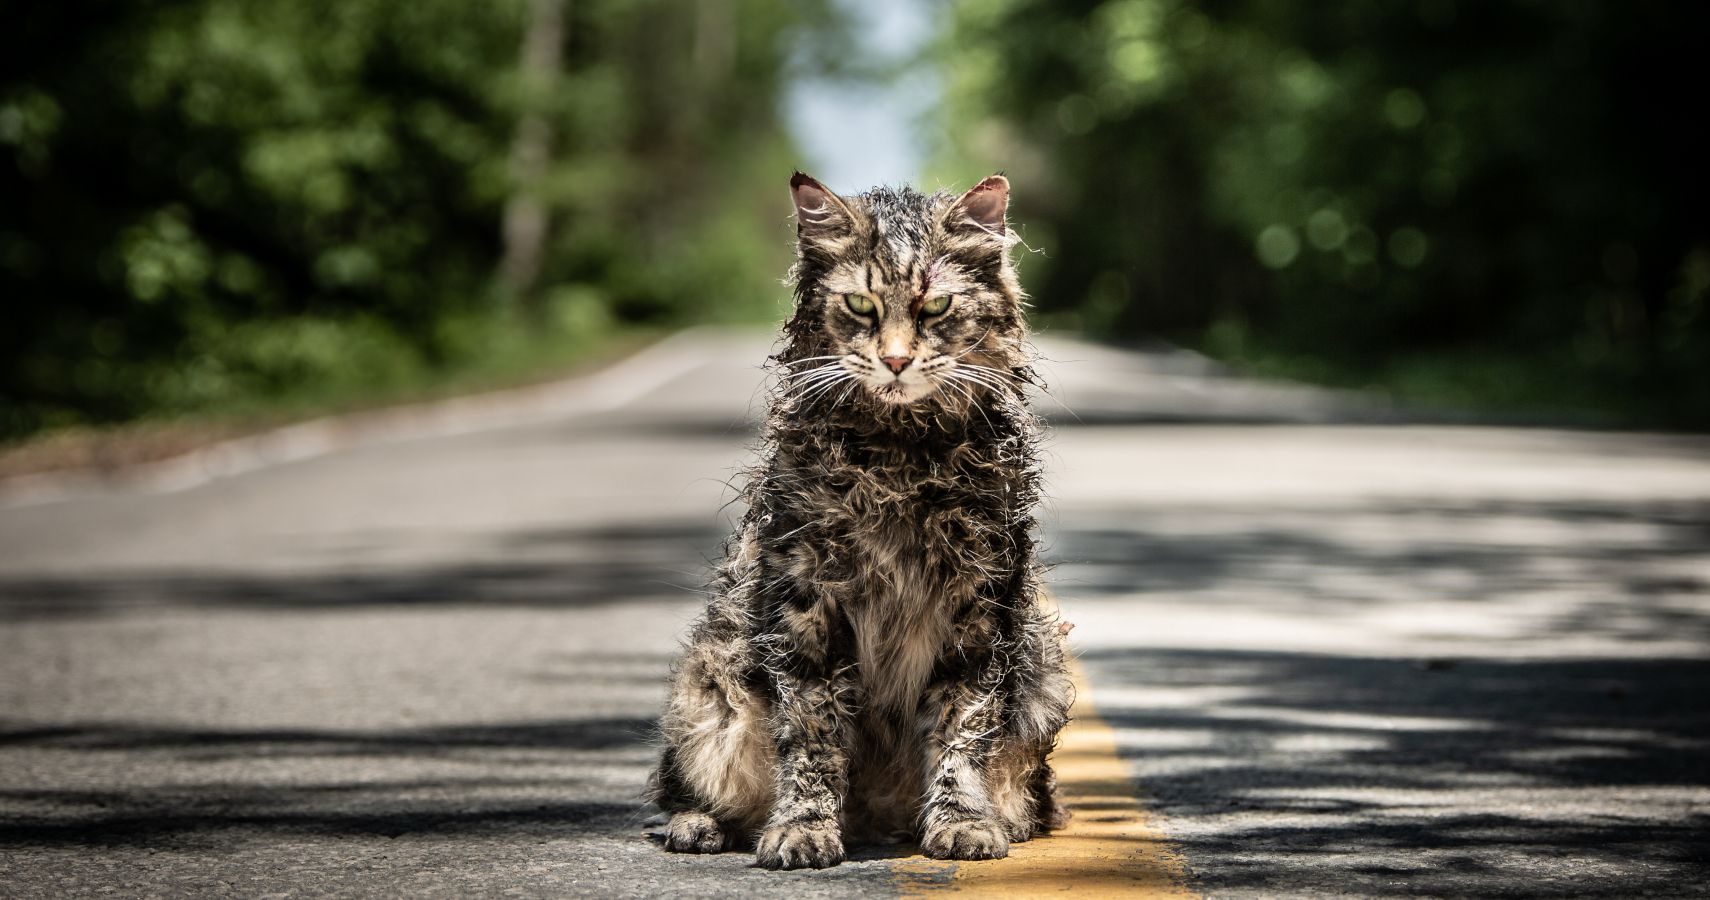 Church the Cat sitting on road from Pet Semetary 2019 remake.